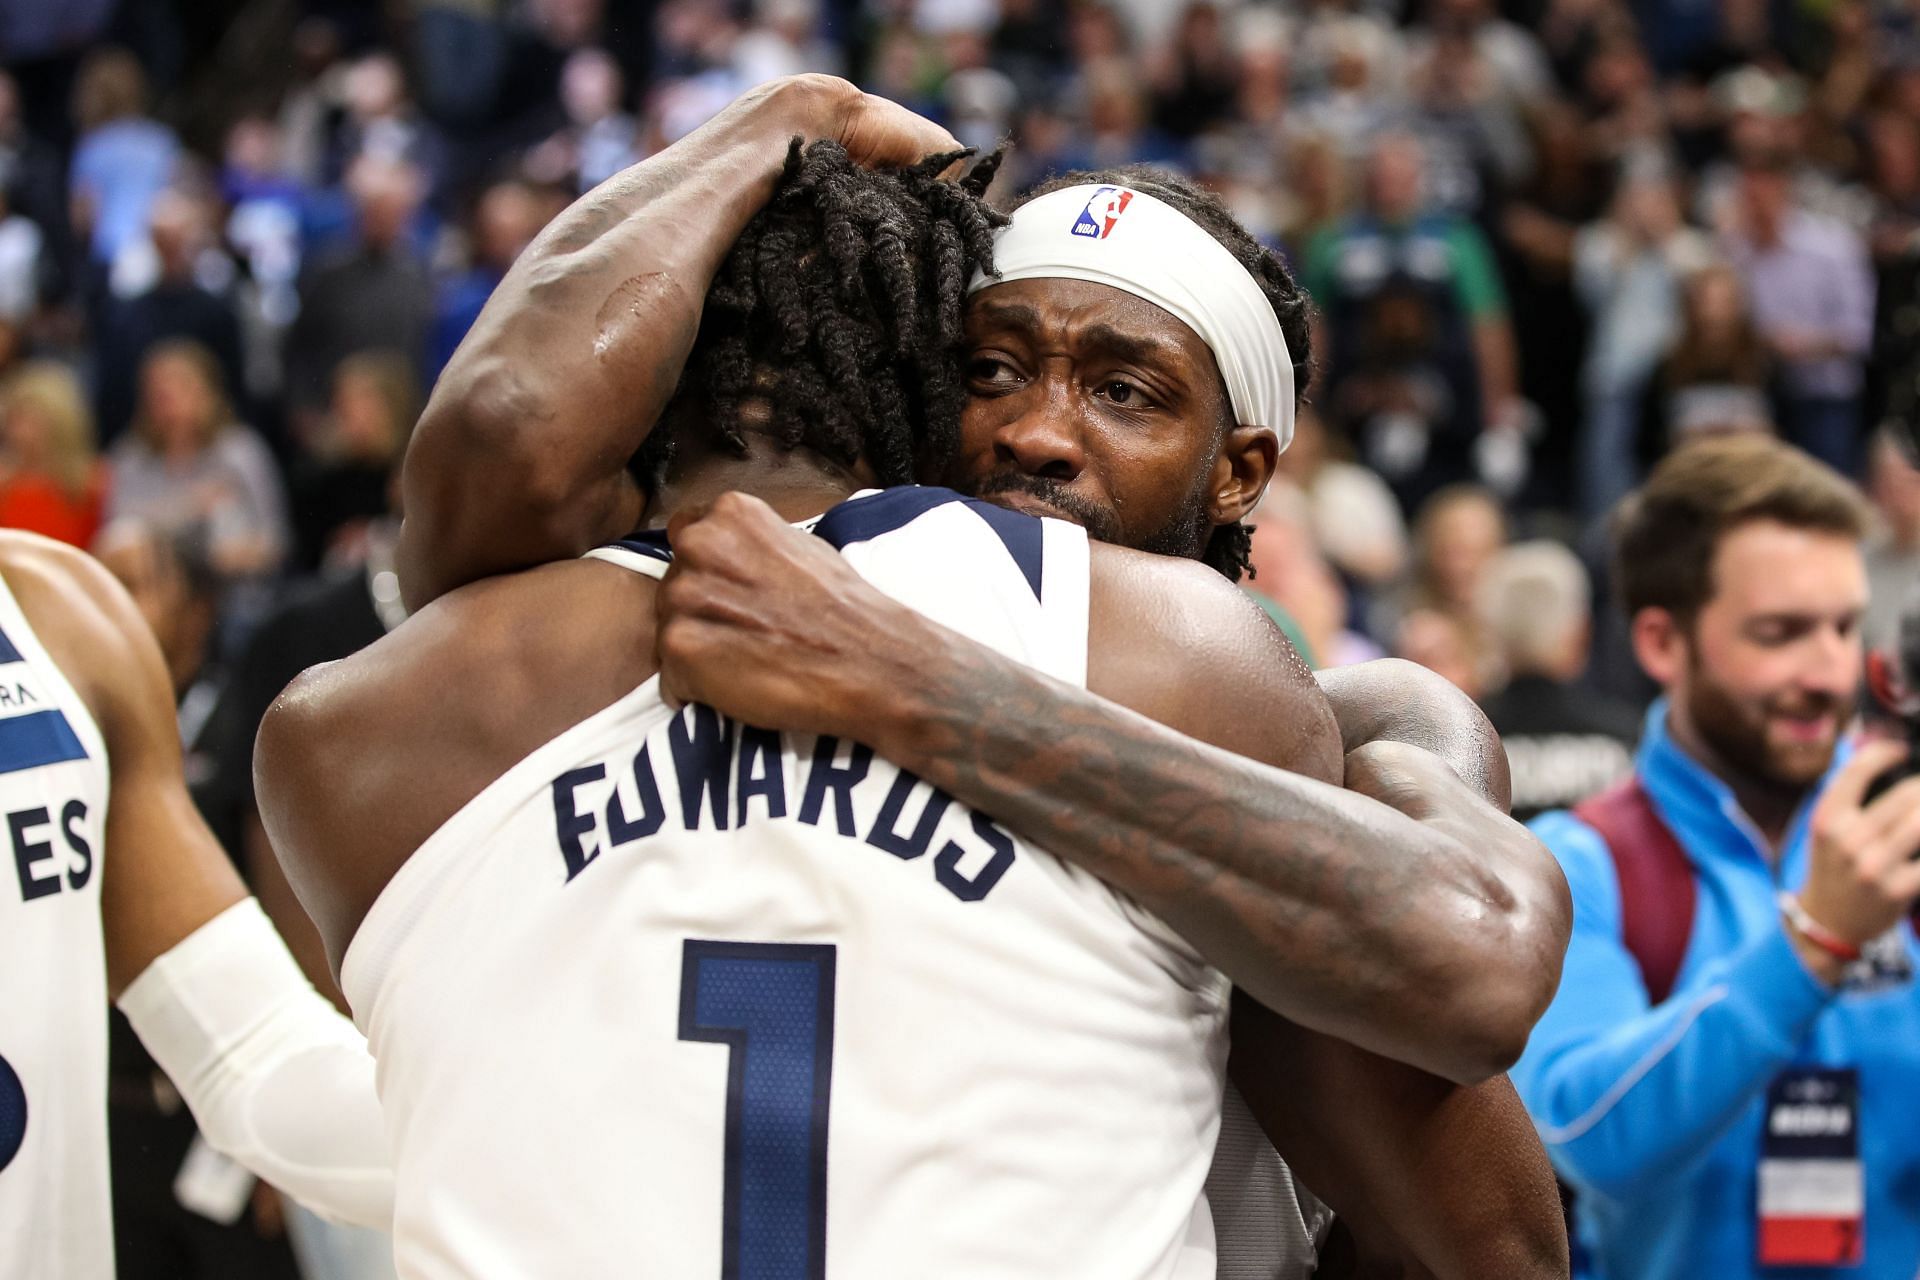 Anthony Edwards has been excellent for the Minnesota Timberwolves this season